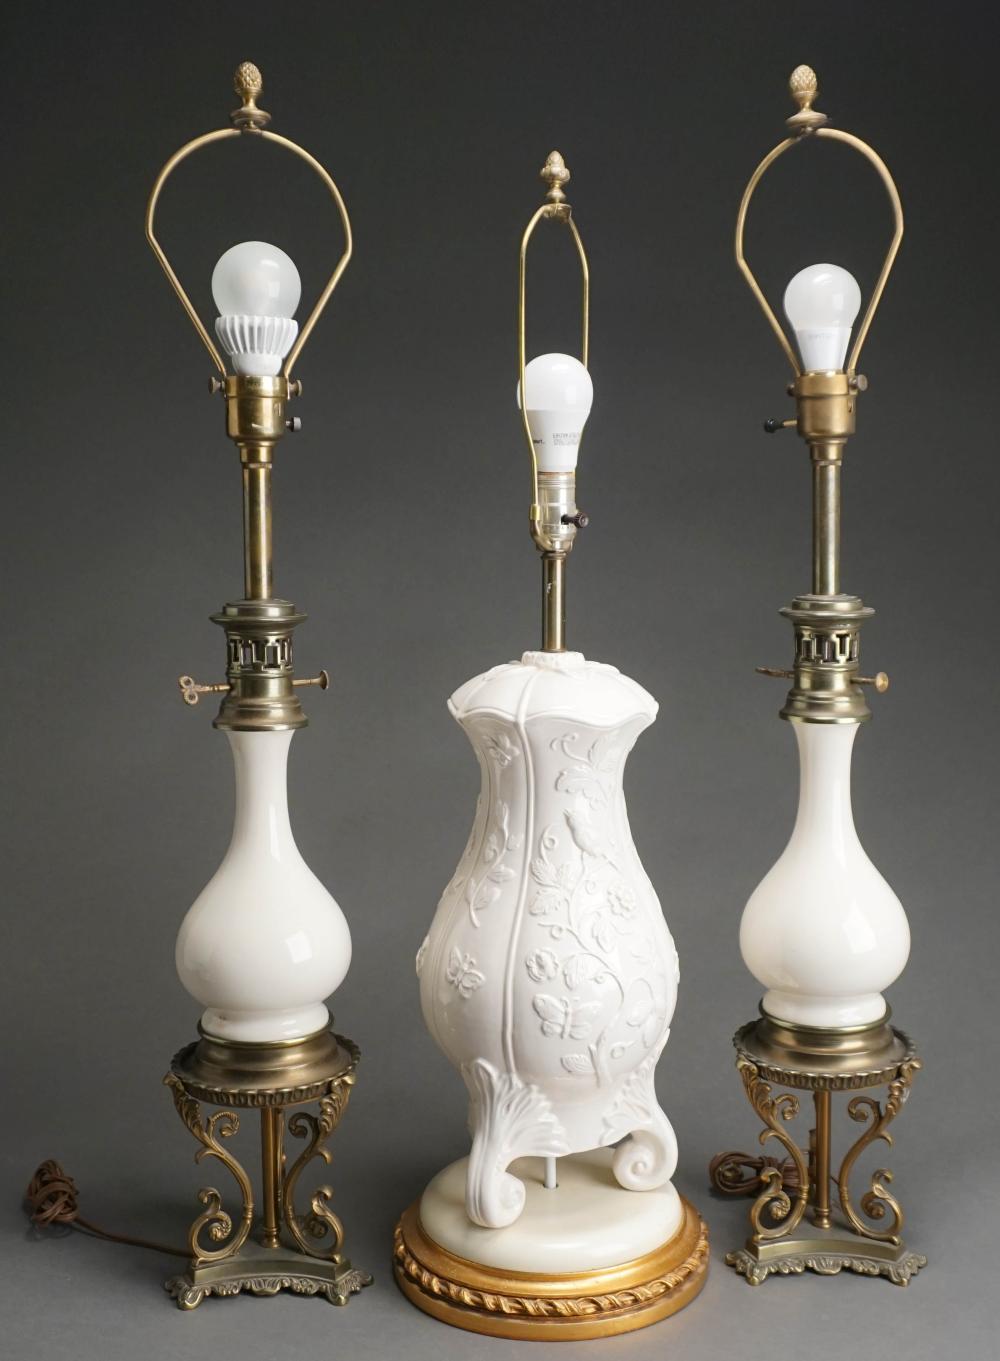 THREE FRENCH PORCELAIN TABLE LAMPS  2e6c02